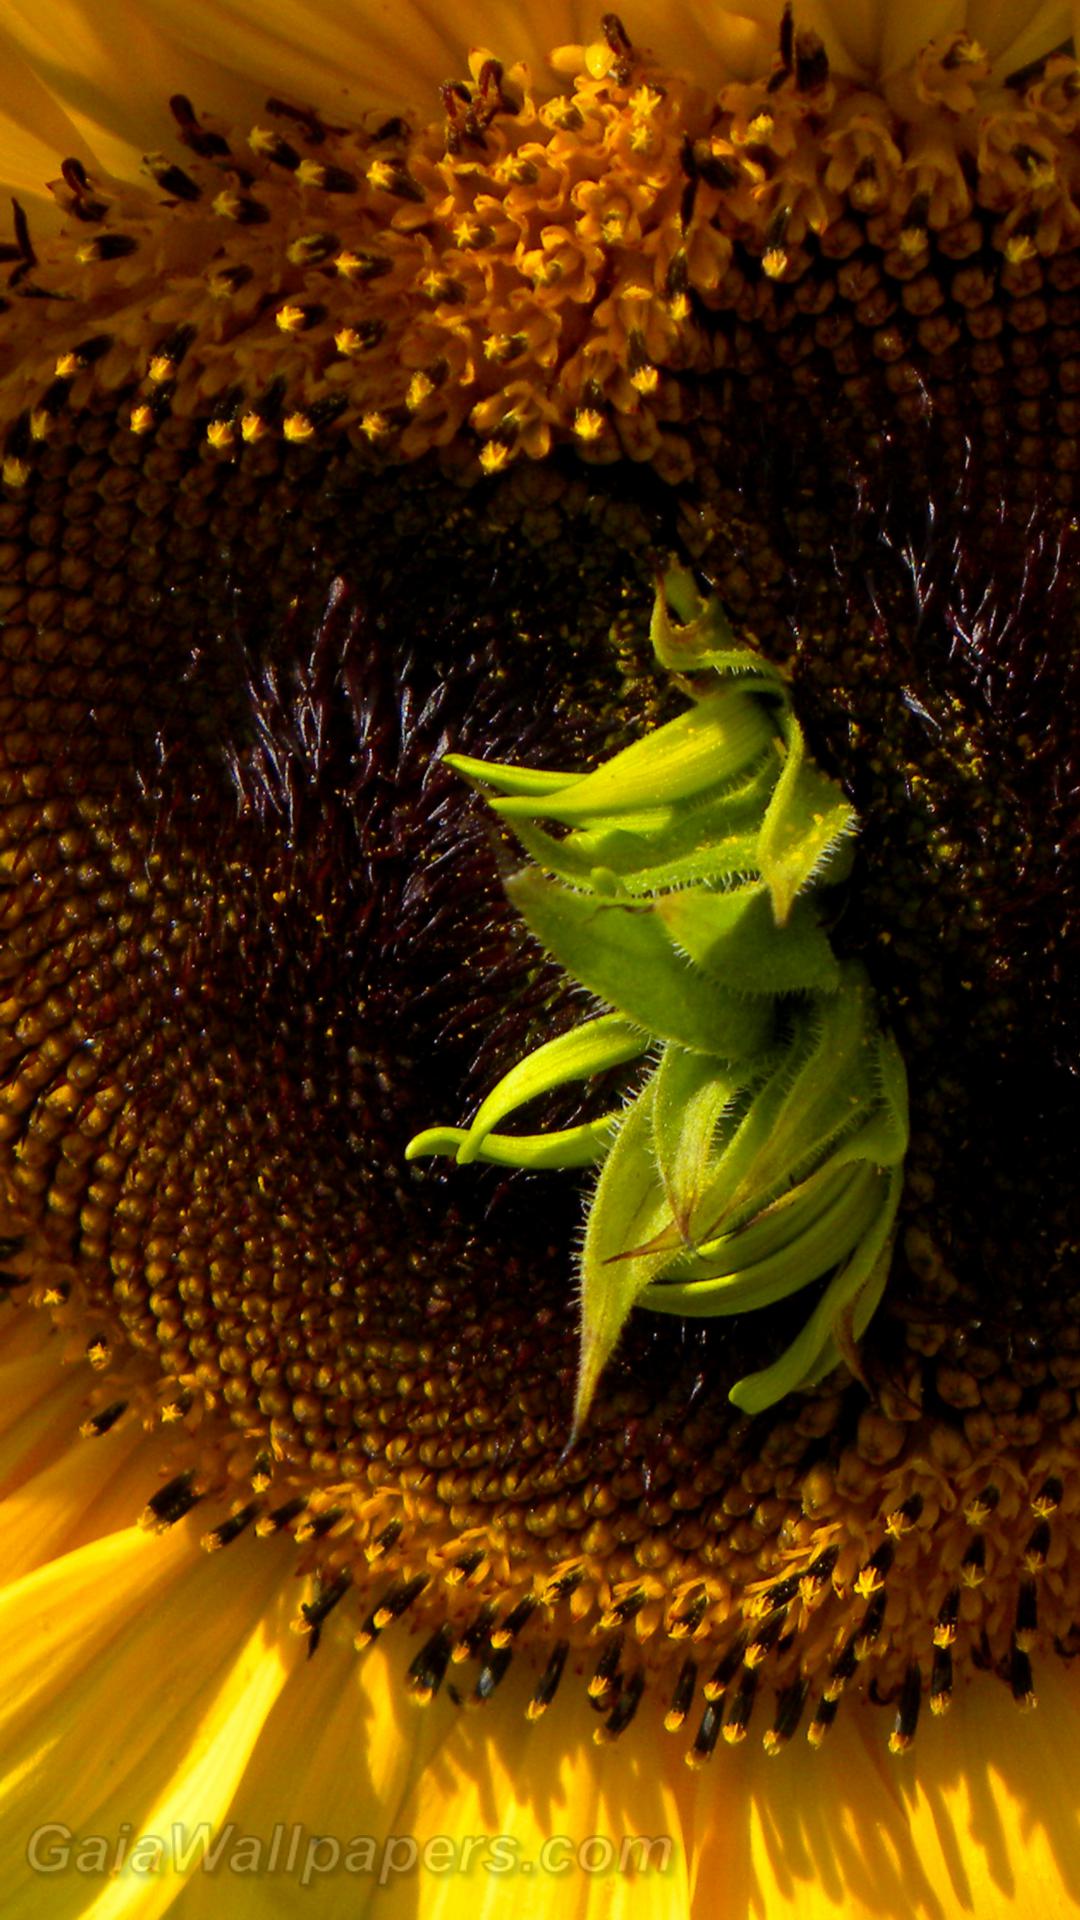 Sunflower with a growth in the center - Free desktop wallpapers